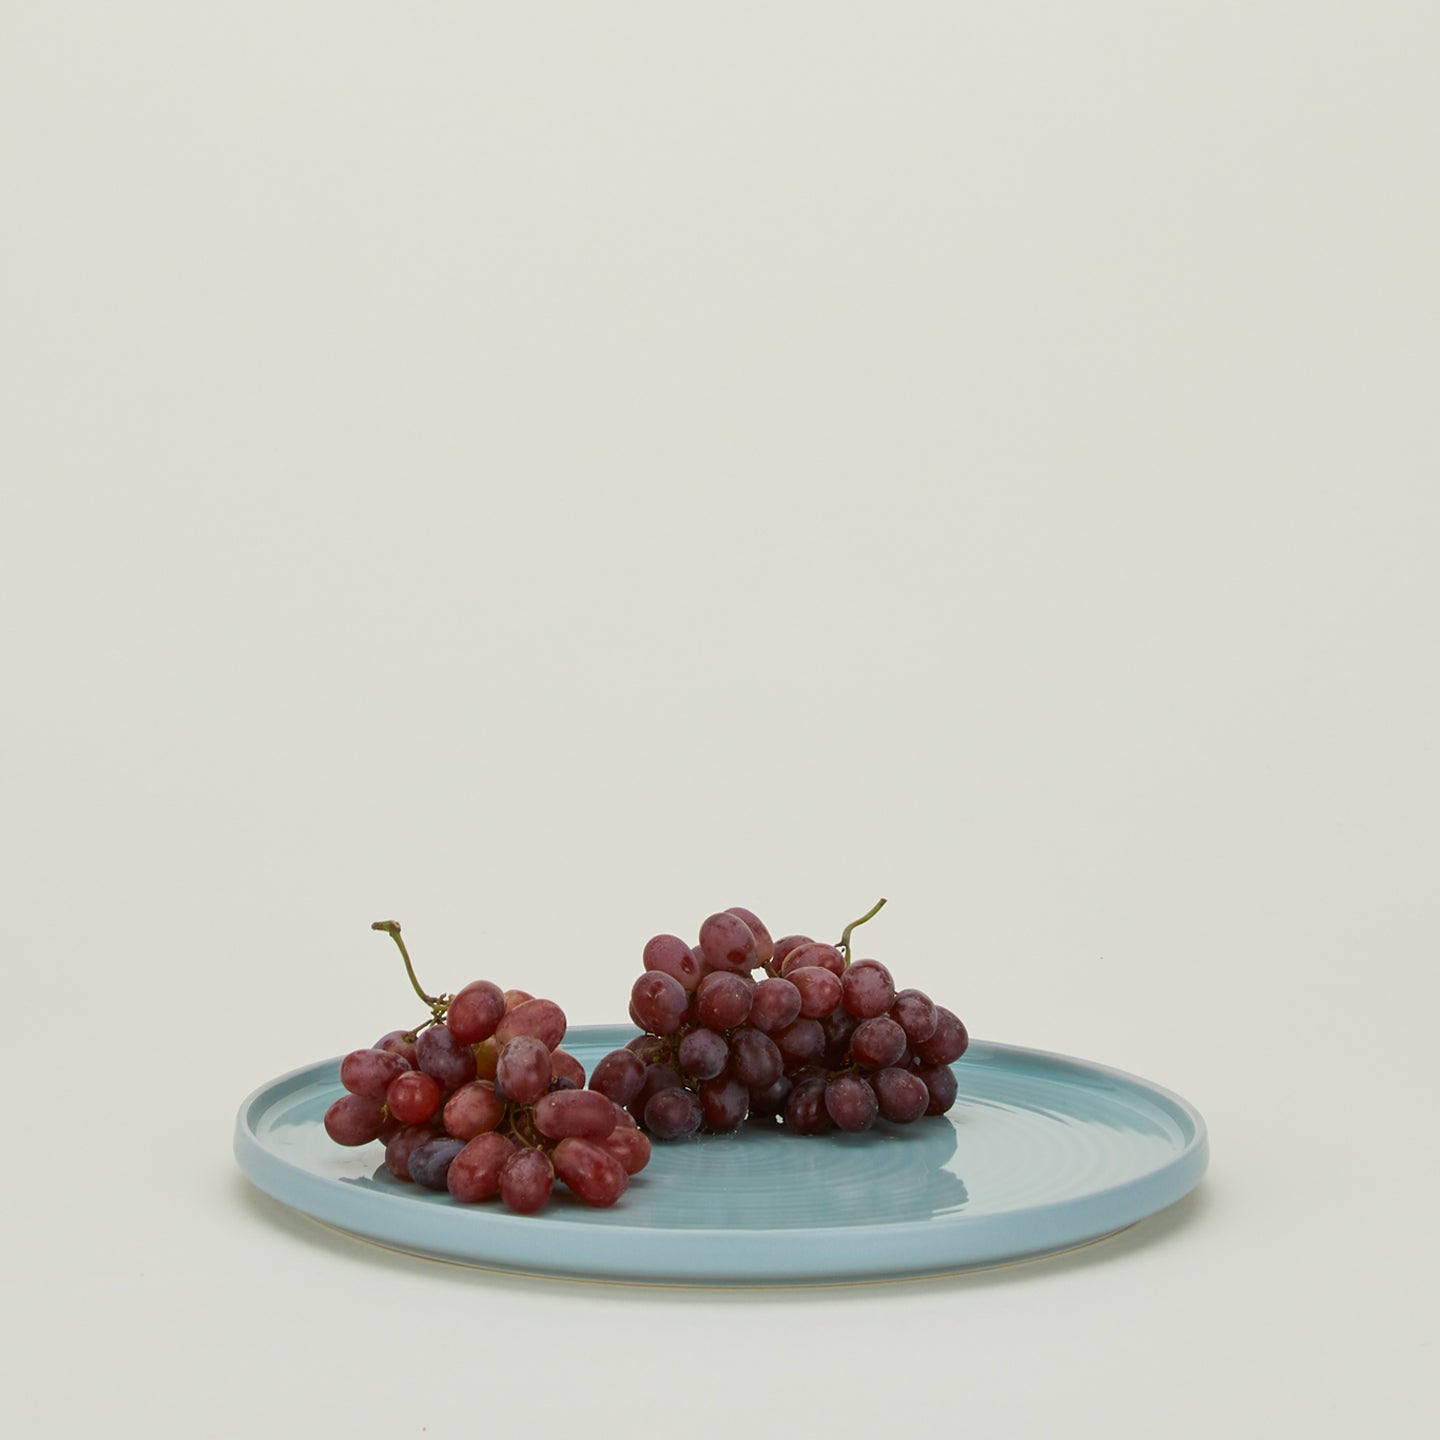 Essential Serving Platter in Sky with grapes.